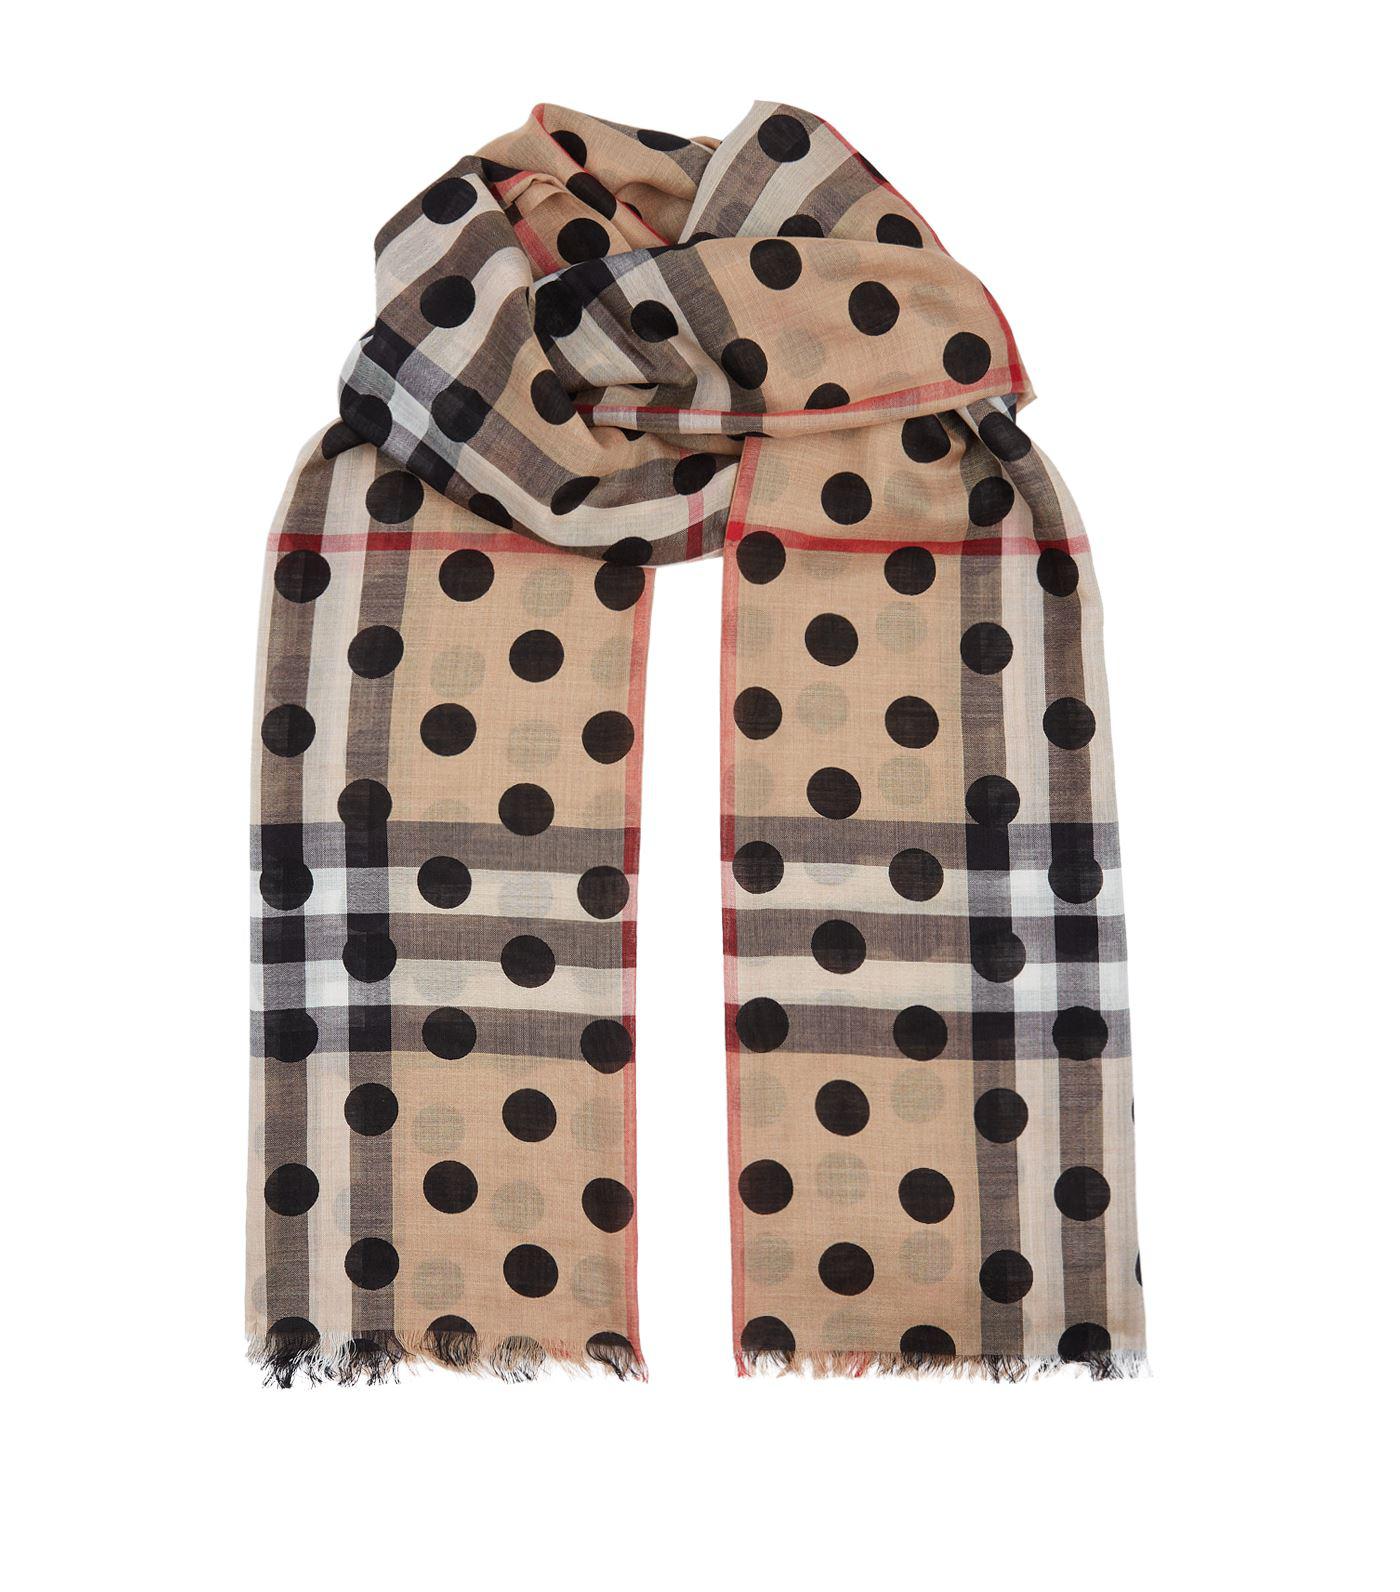 Burberry Giant Check Polka Dot Scarf in Black | Lyst